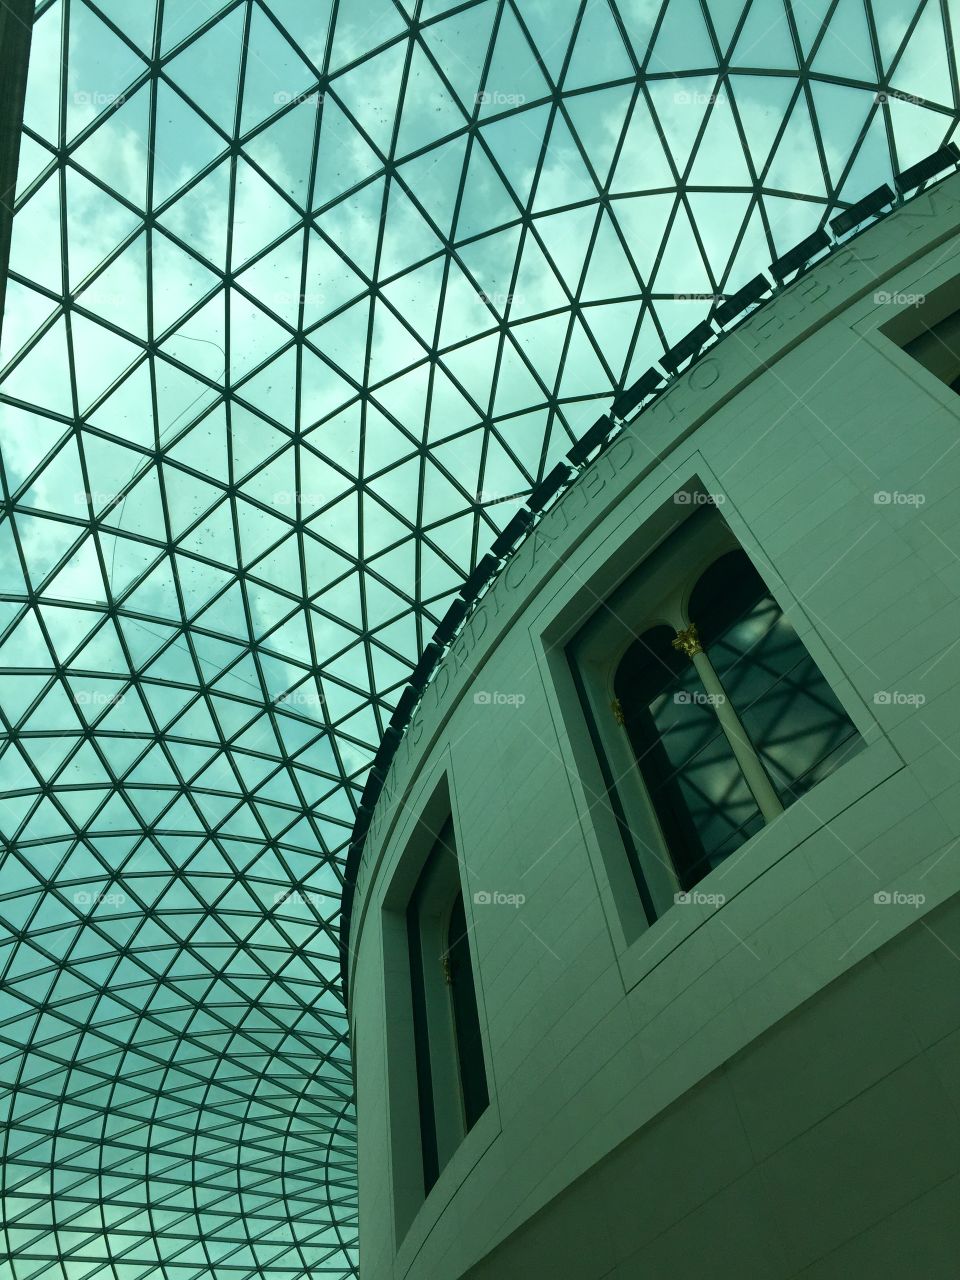 Ceiling of the British Museum. Glass ceiling over the Great Court of the British Museum in London.